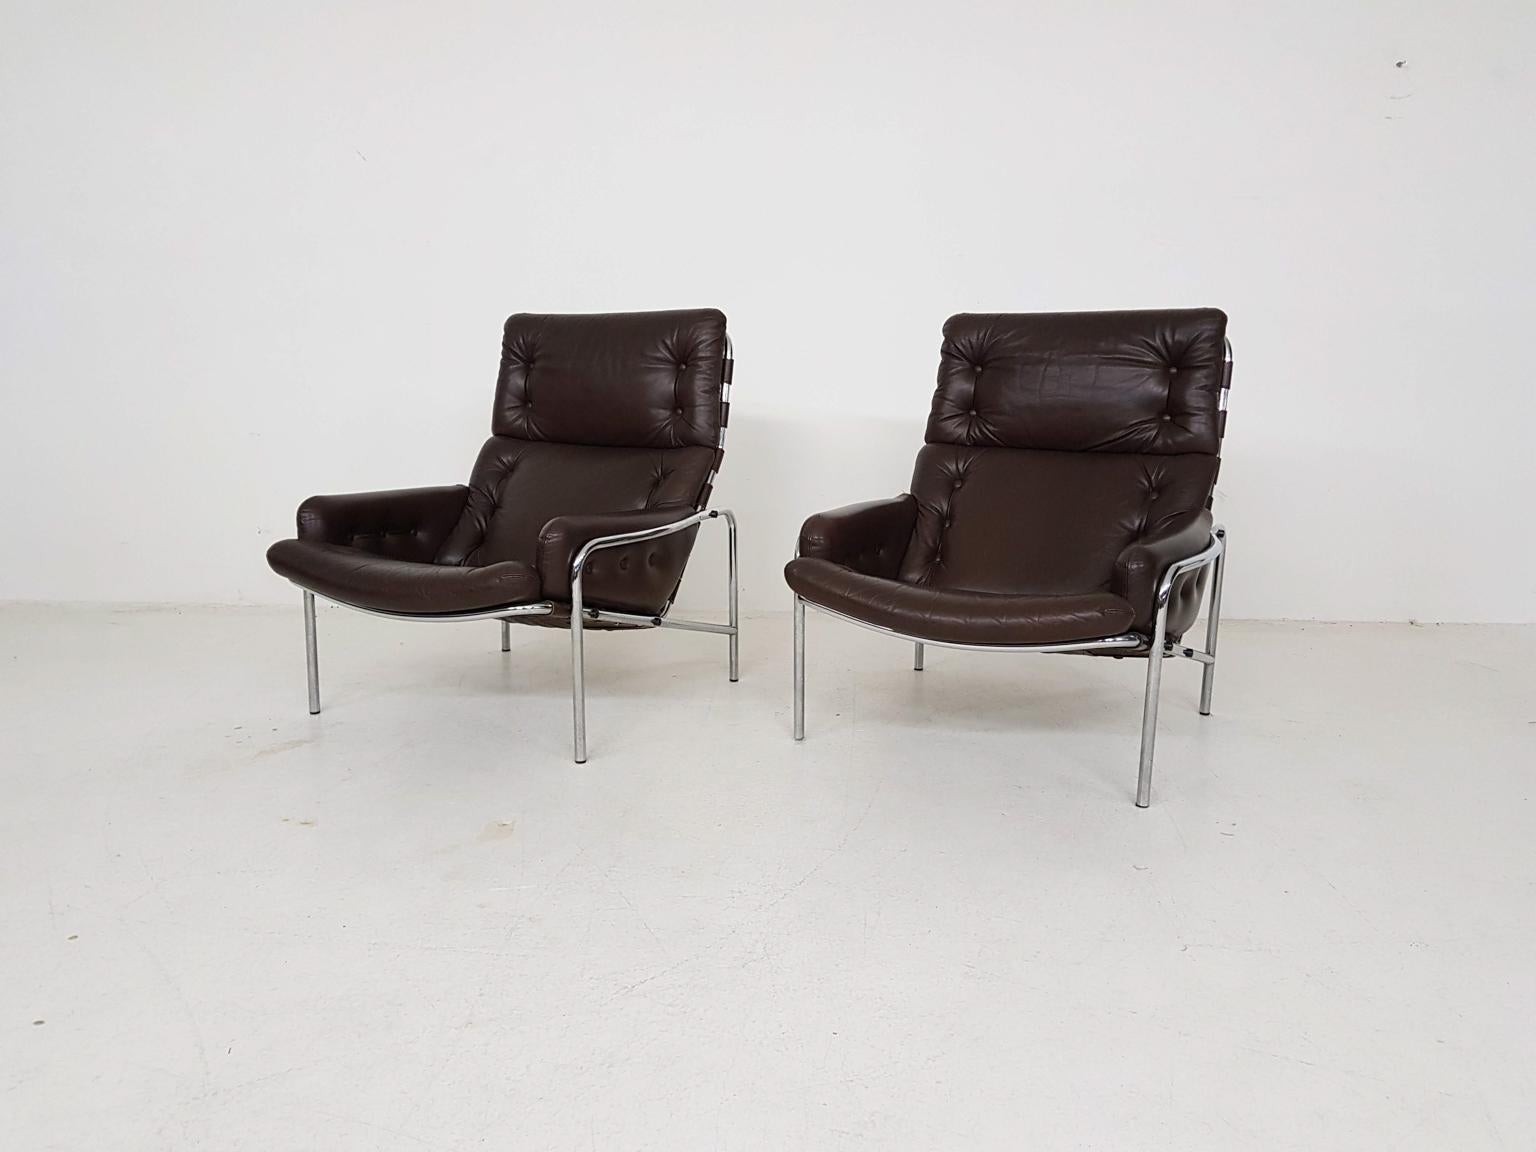 We currently have 1 (one) chair available. On sale!

Brown leather lounge chair by Martin Visser for ’t Spectrum model Sz09 “Nagoya”, made and designed in The Netherlands in 1969.

Visser designed this lounge chair in 1969 when he was working for